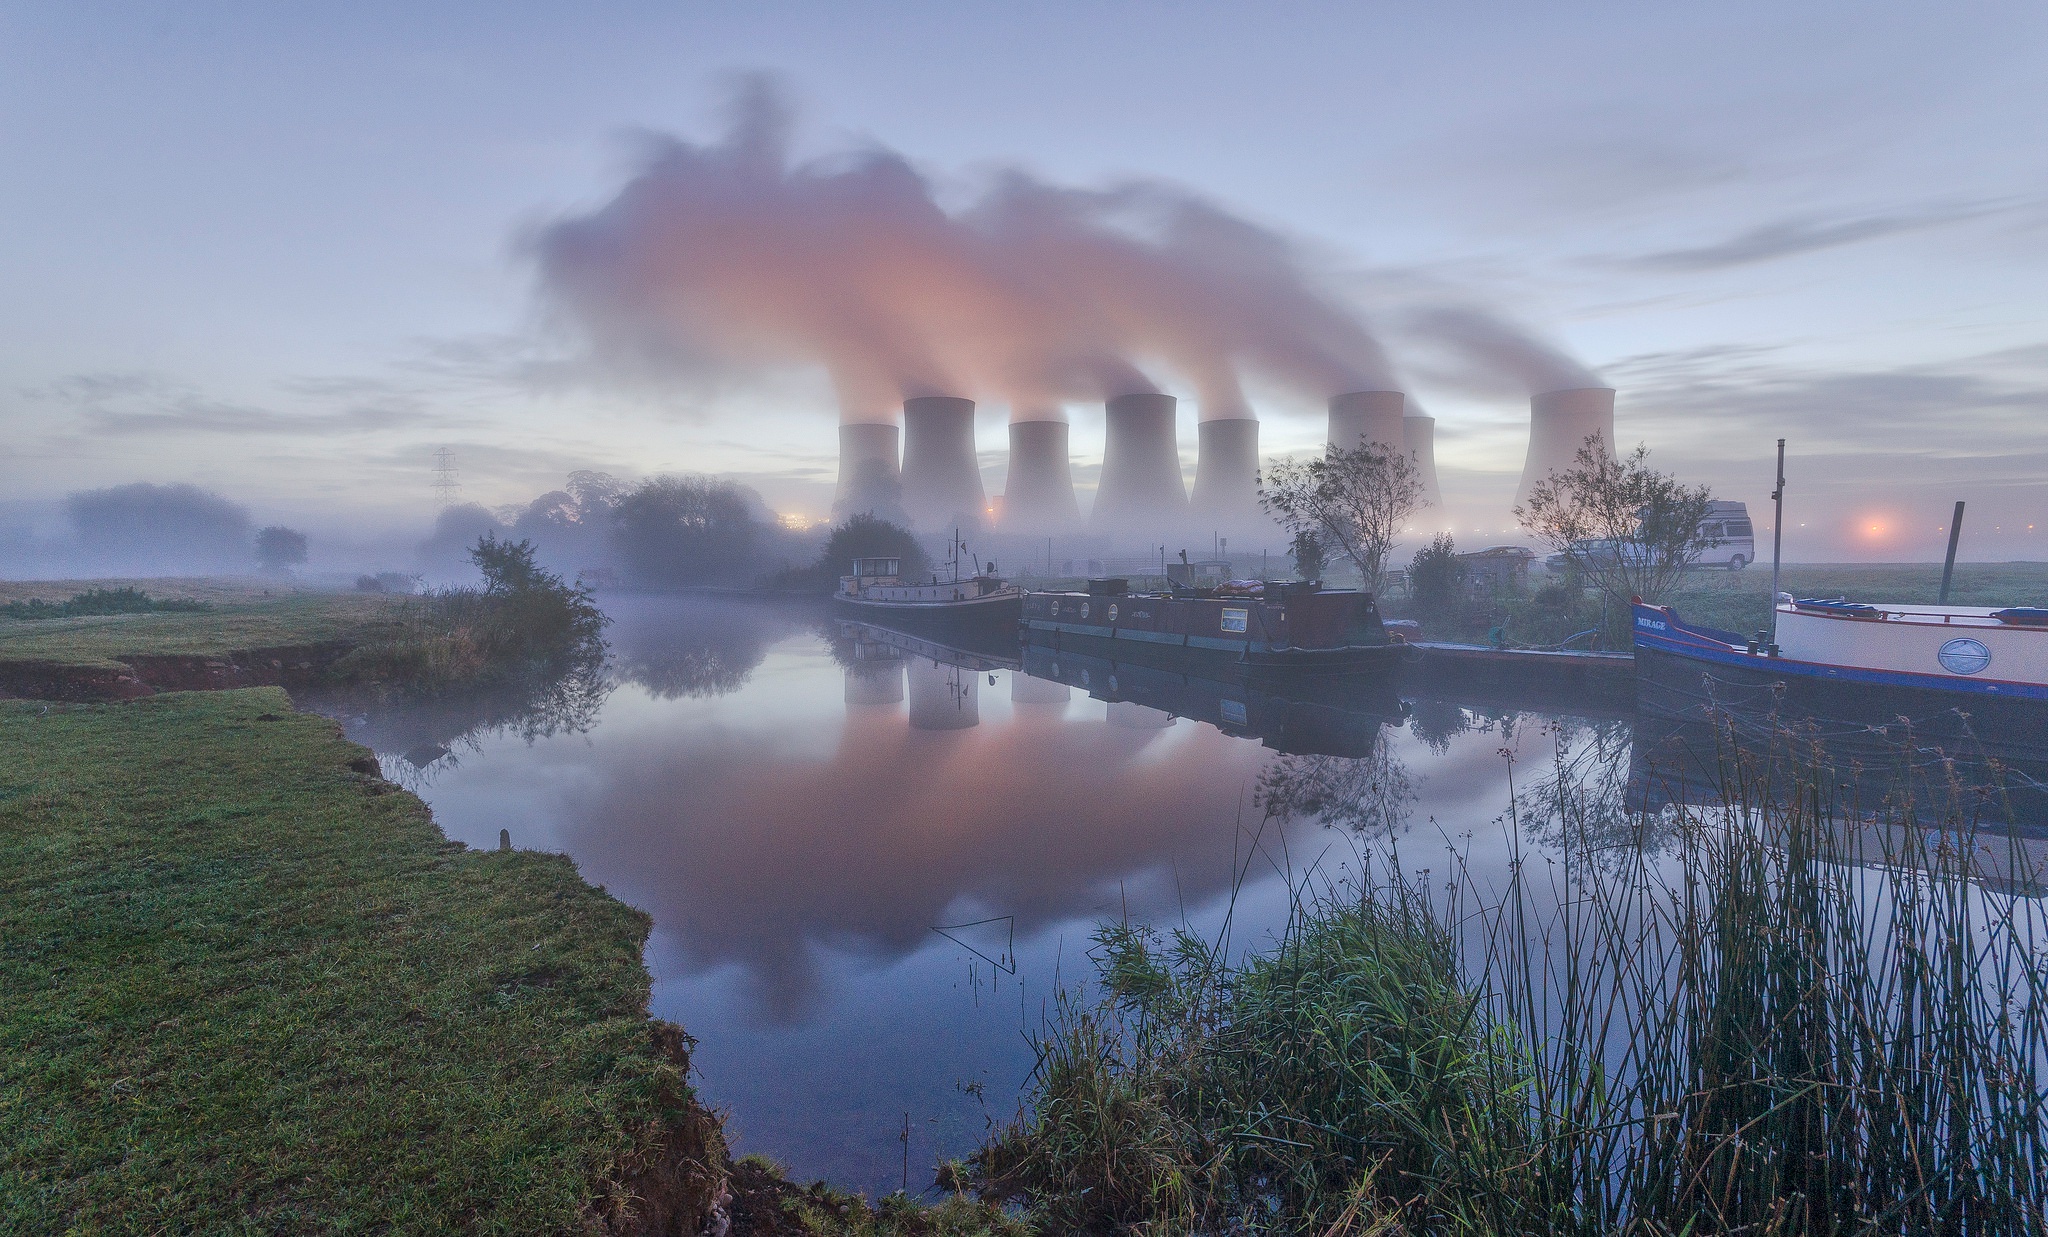 General 2048x1237 smoke power plant cooling towers environment trees long exposure water boat reflection grass river mist coal Ratcliffe-on-Soar